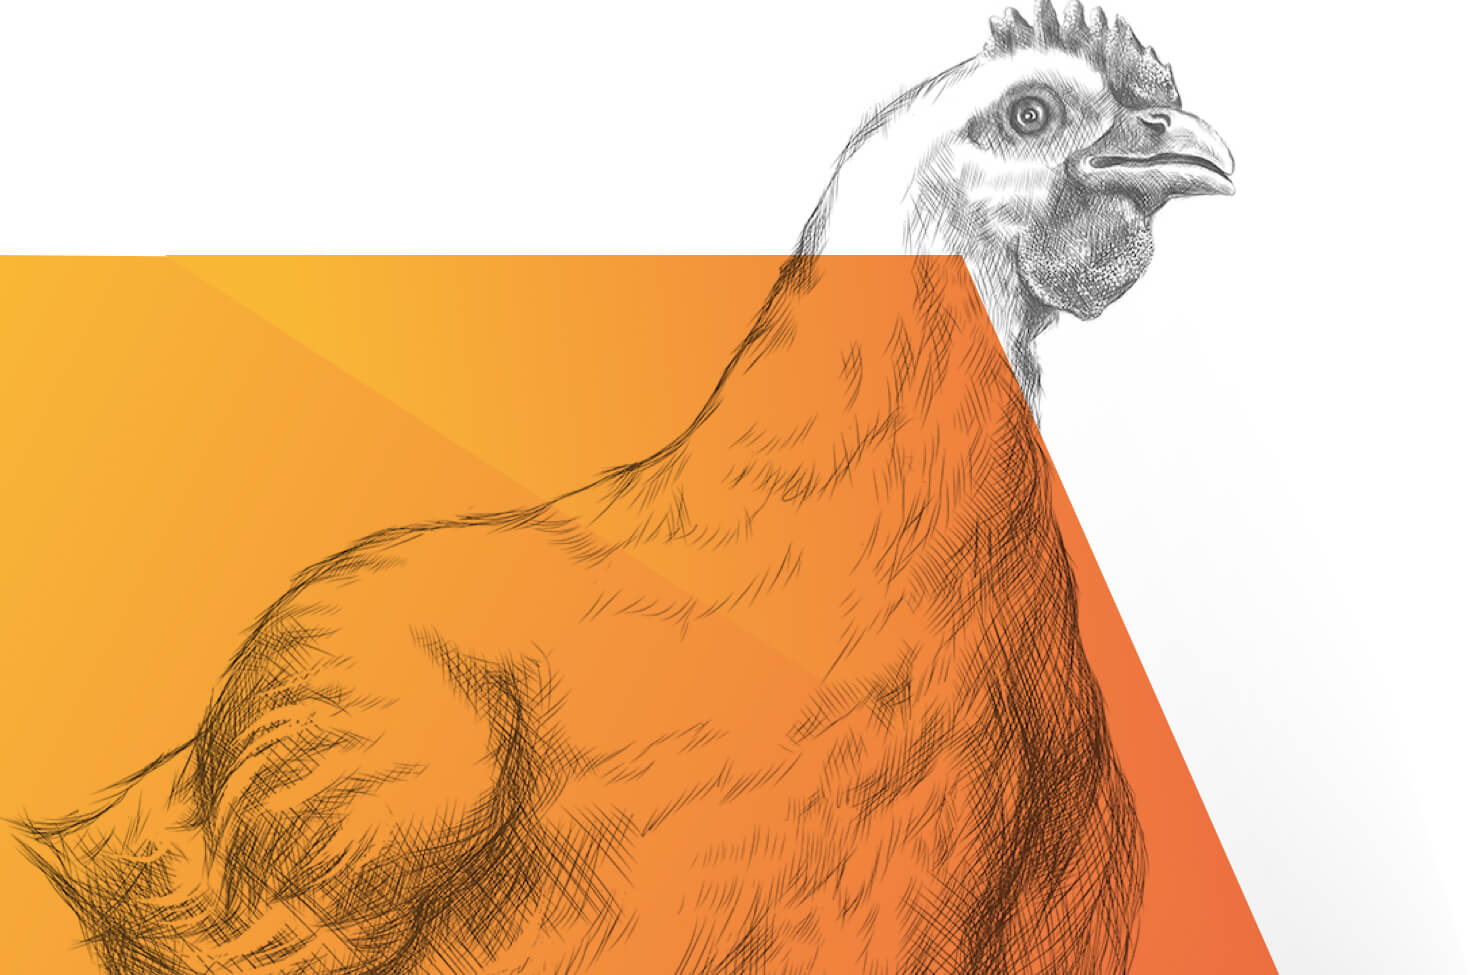 A chicken drawn in black and white, partially covered with an orange, semi-transparent colored area in the foreground.